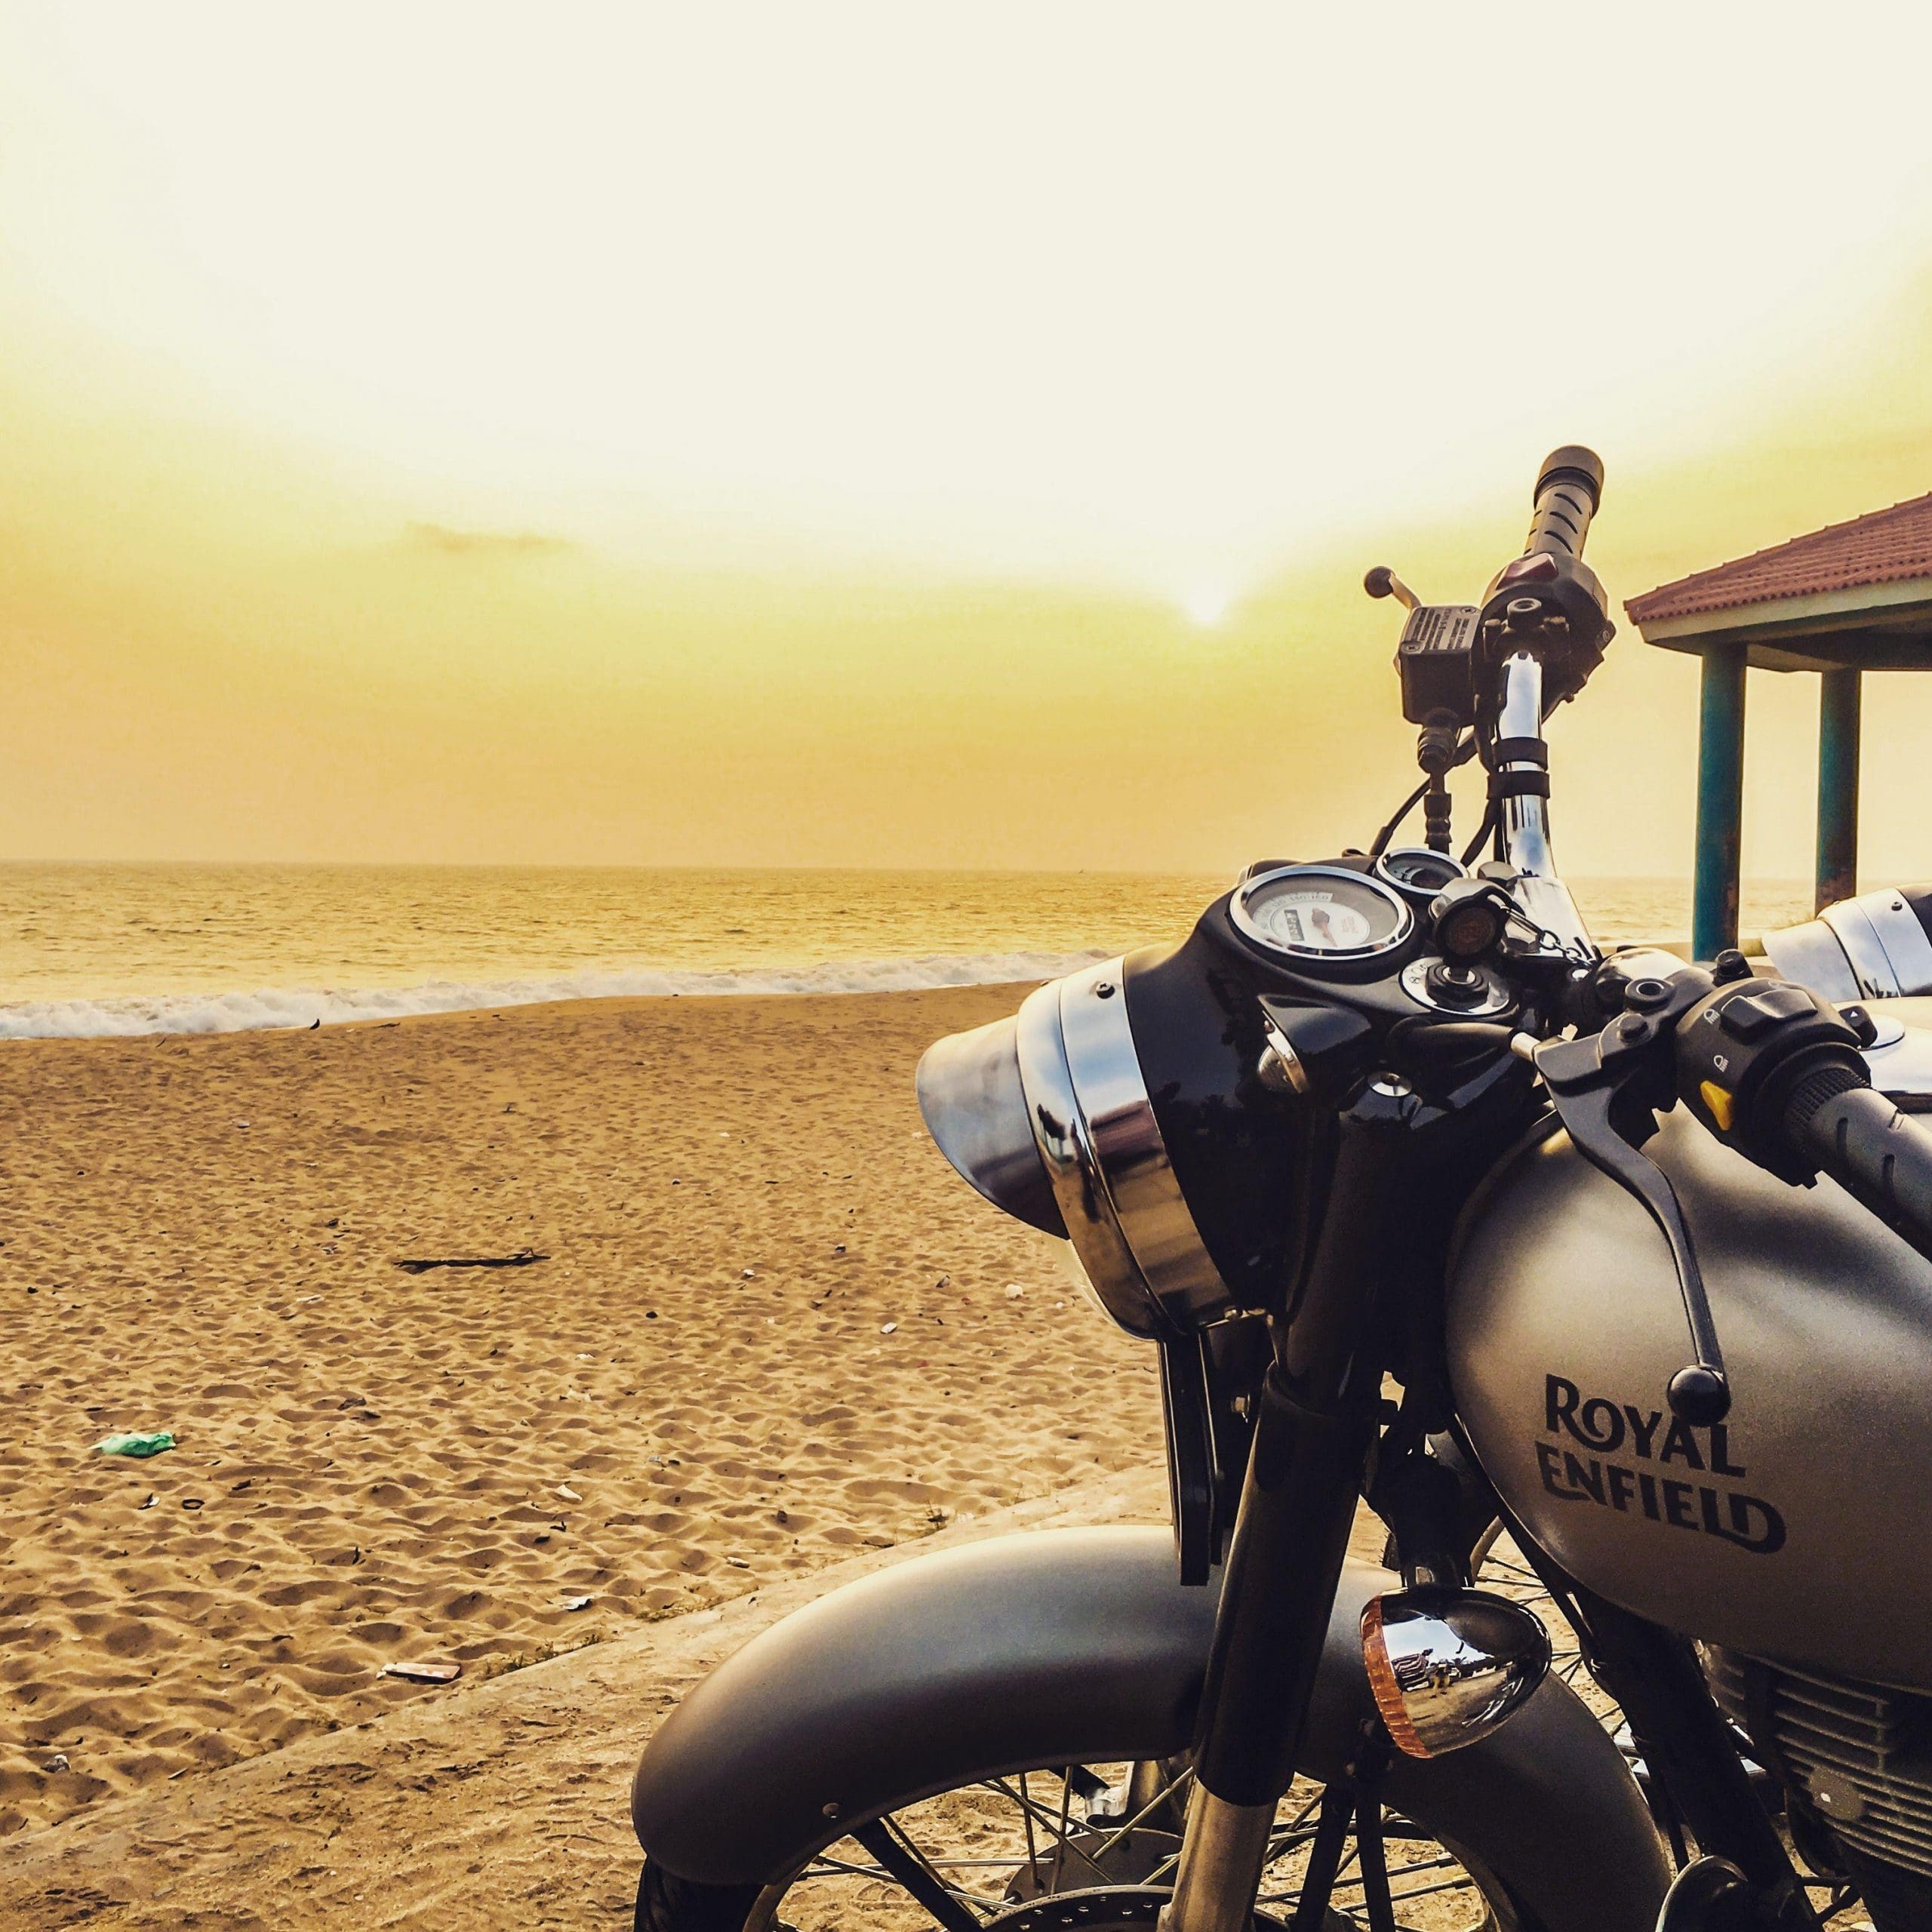 Download Royal Enfield images  42 HD pictures and stock photos